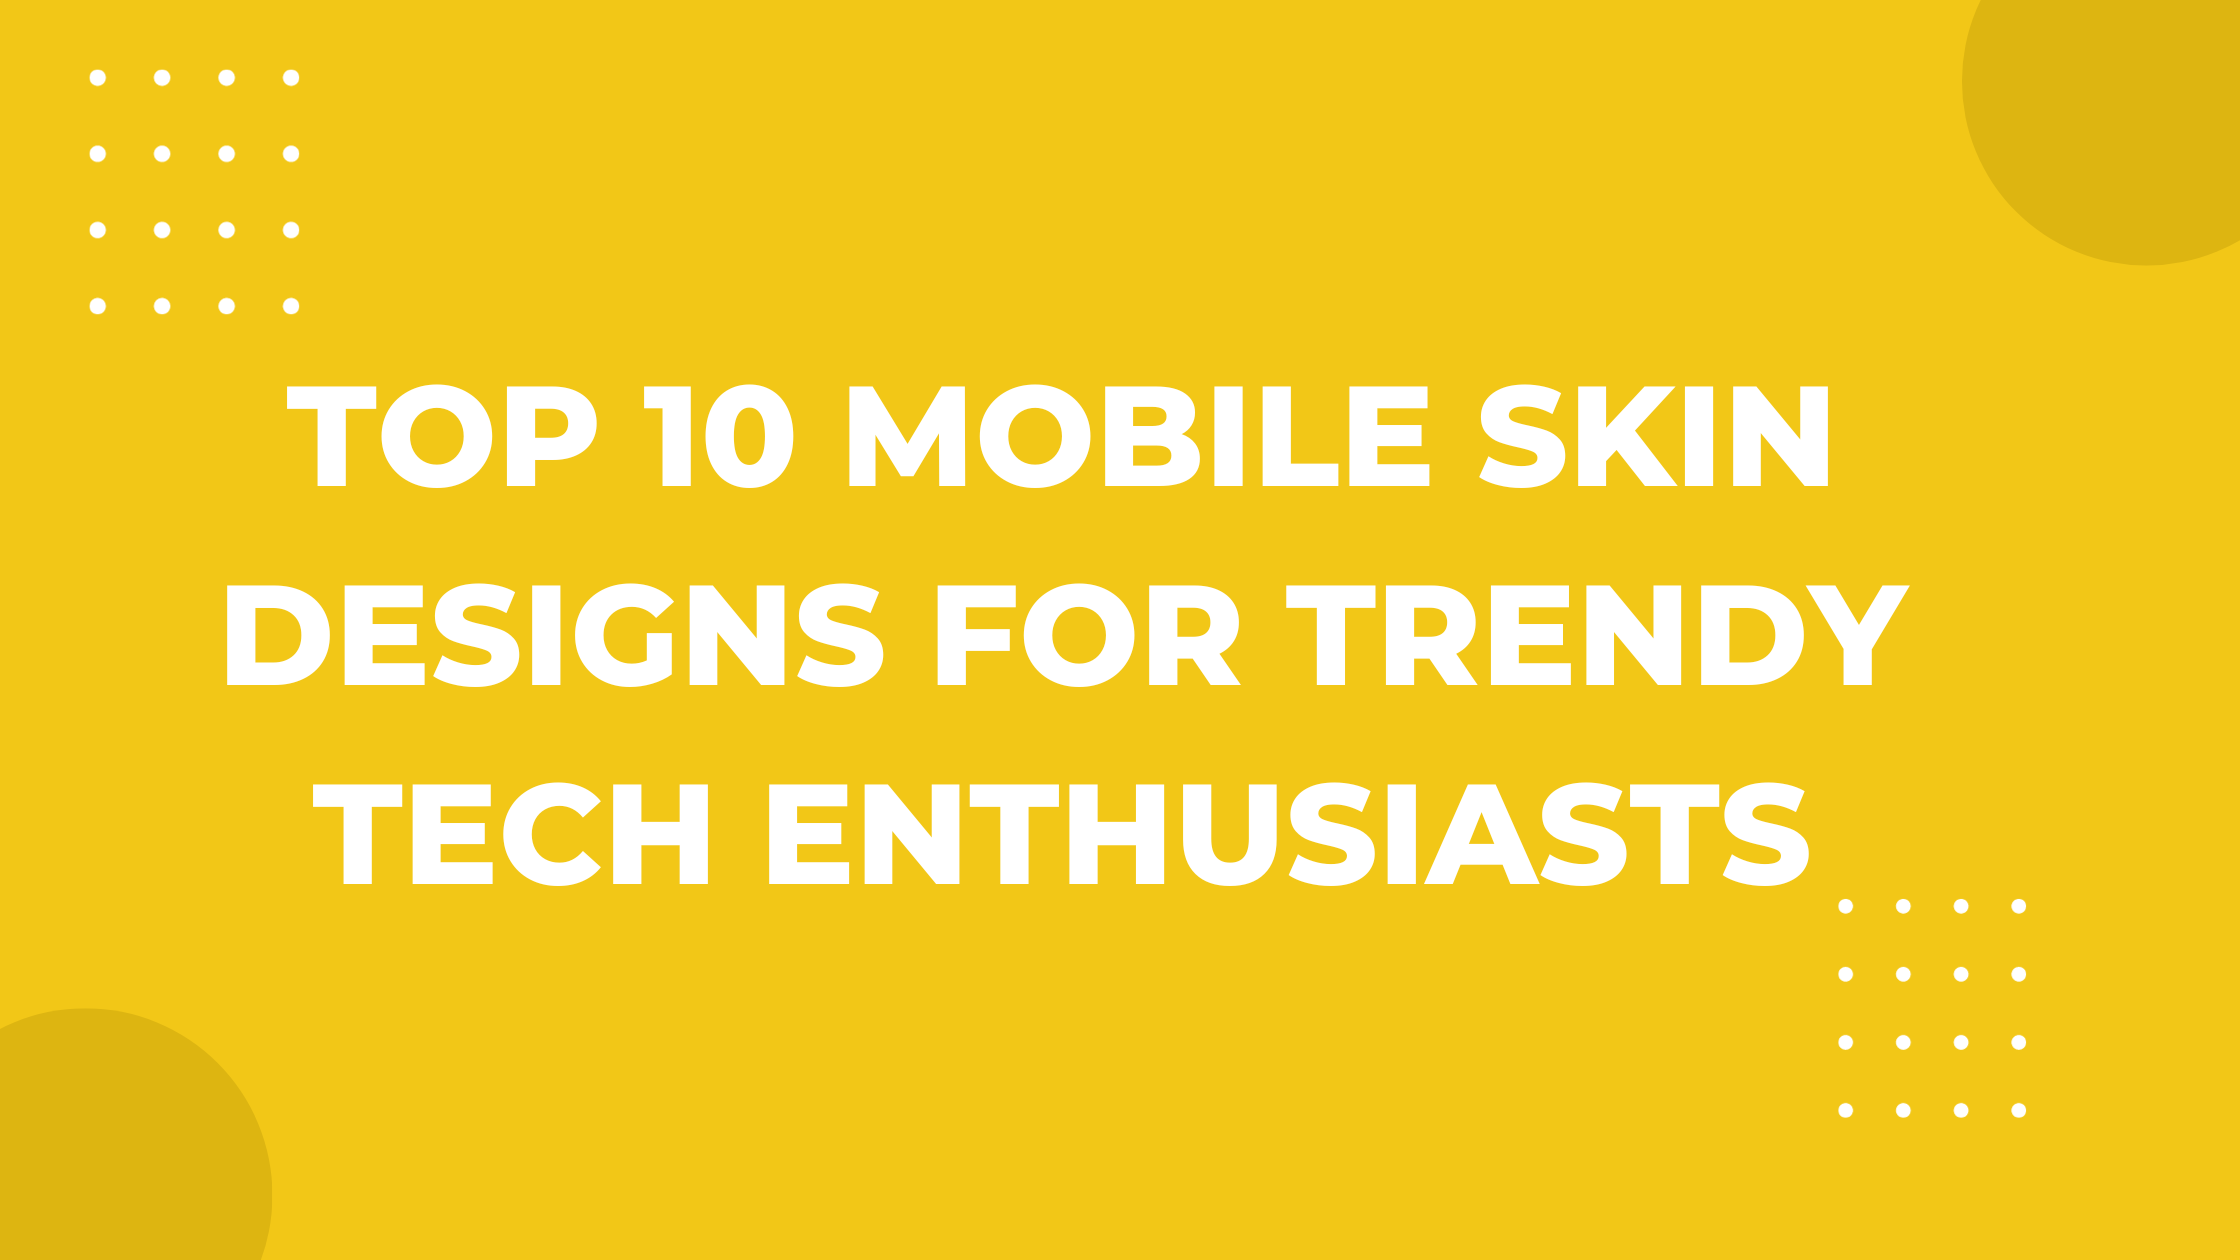 Top 10 Mobile Skin Designs for Trendy Tech Enthusiasts